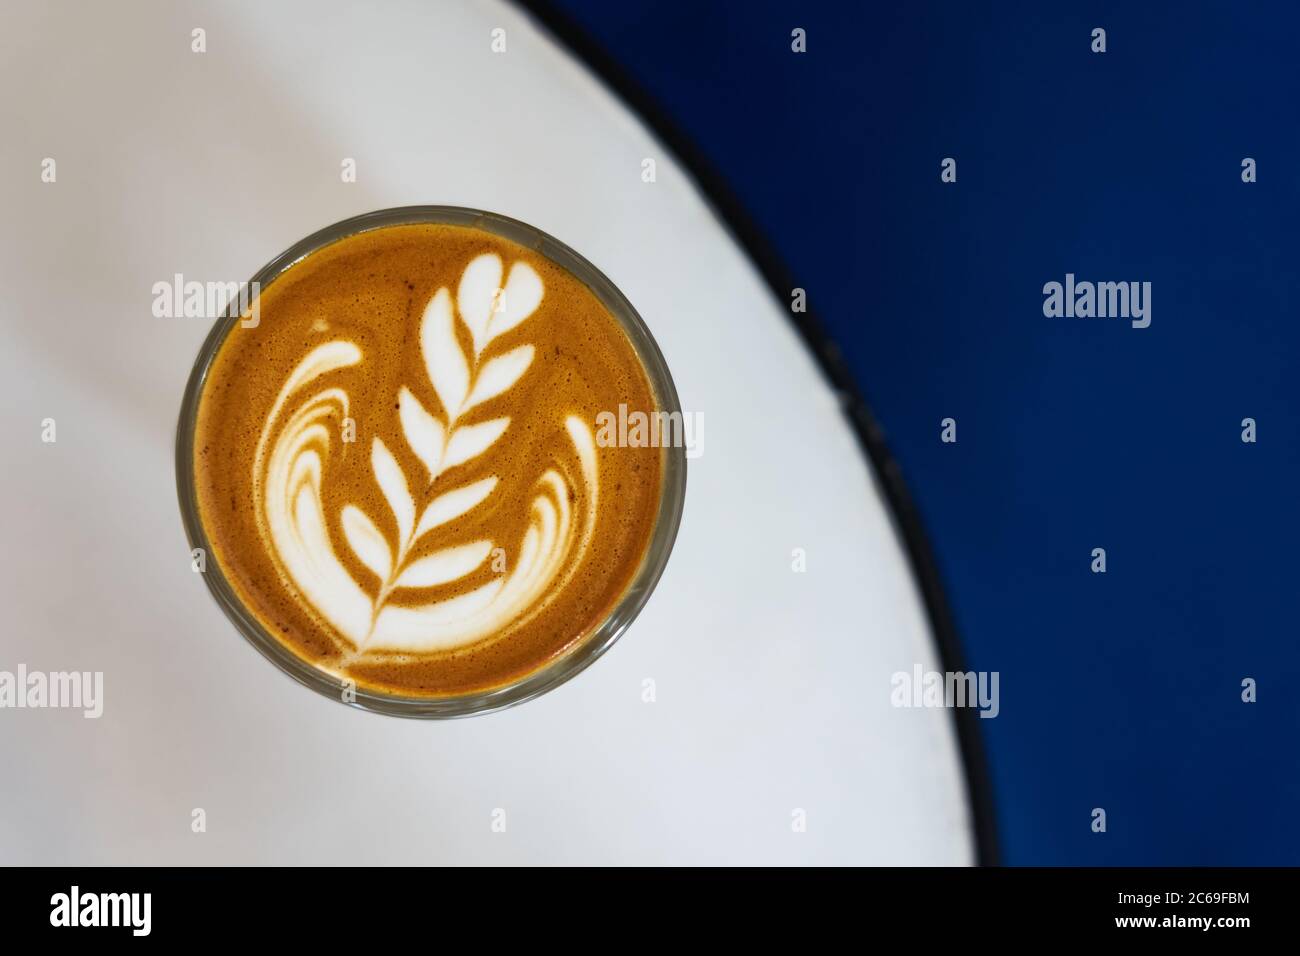 A perfectly made cappuccino from a speciality café in Kuwait. Stock Photo